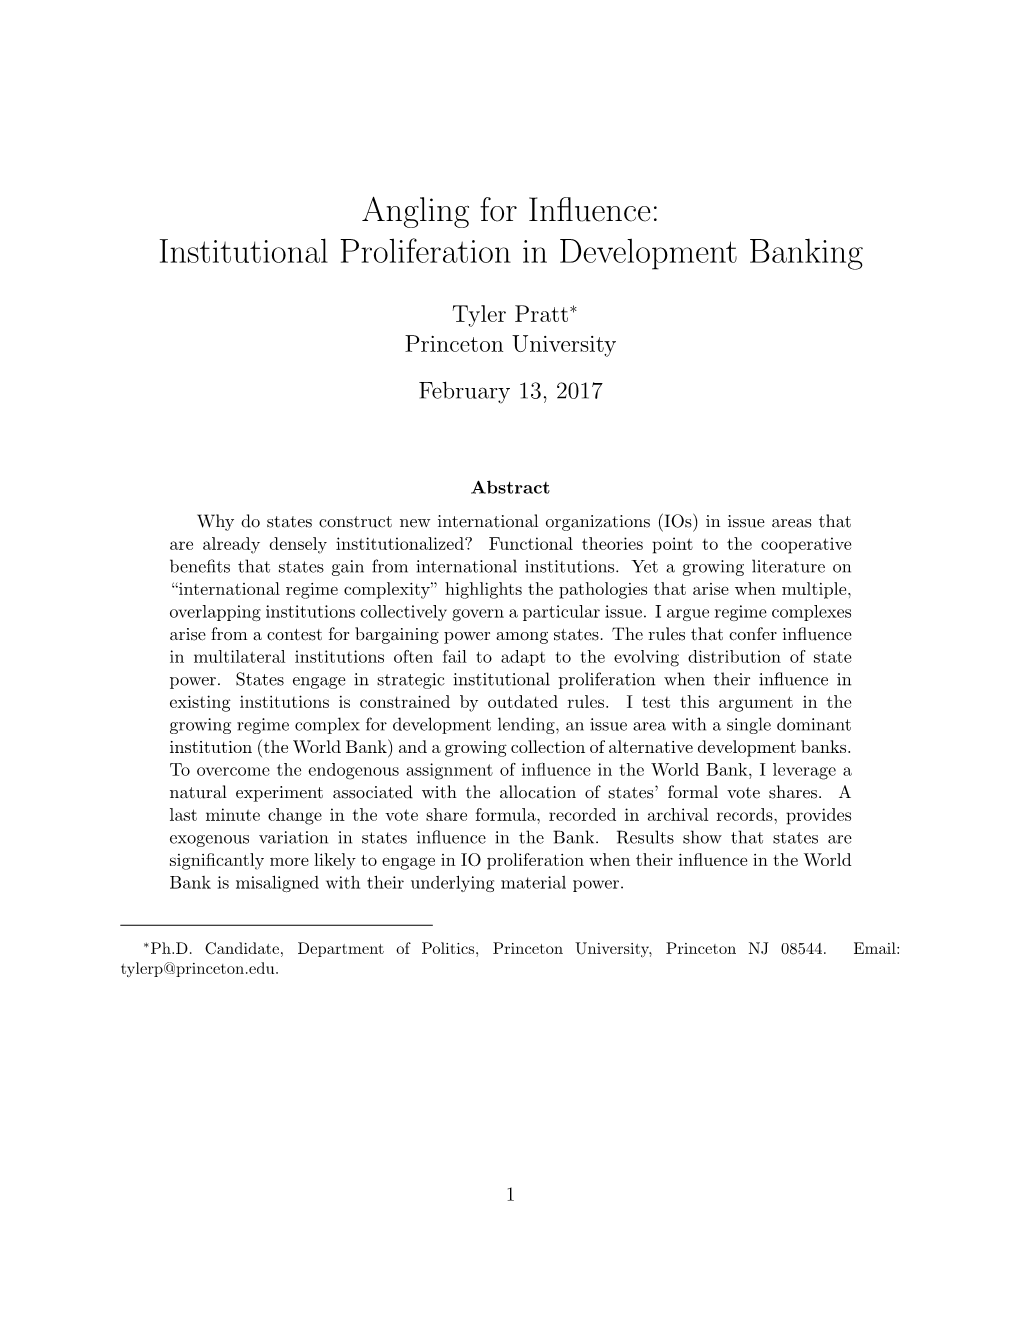 Angling for Influence: Institutional Proliferation in Development Banking